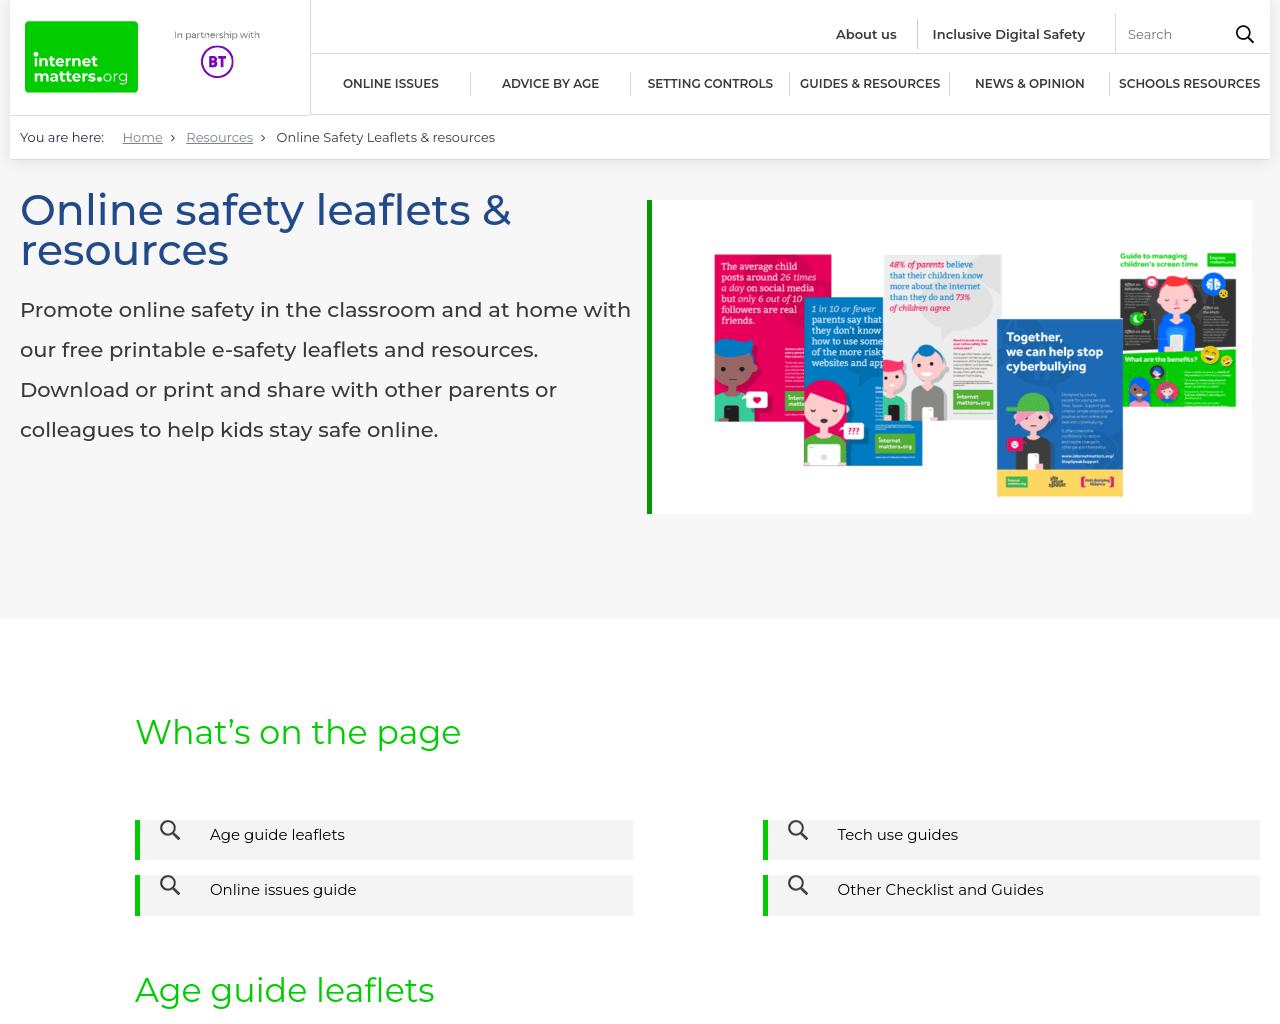 Online Safety leaflets and Resources